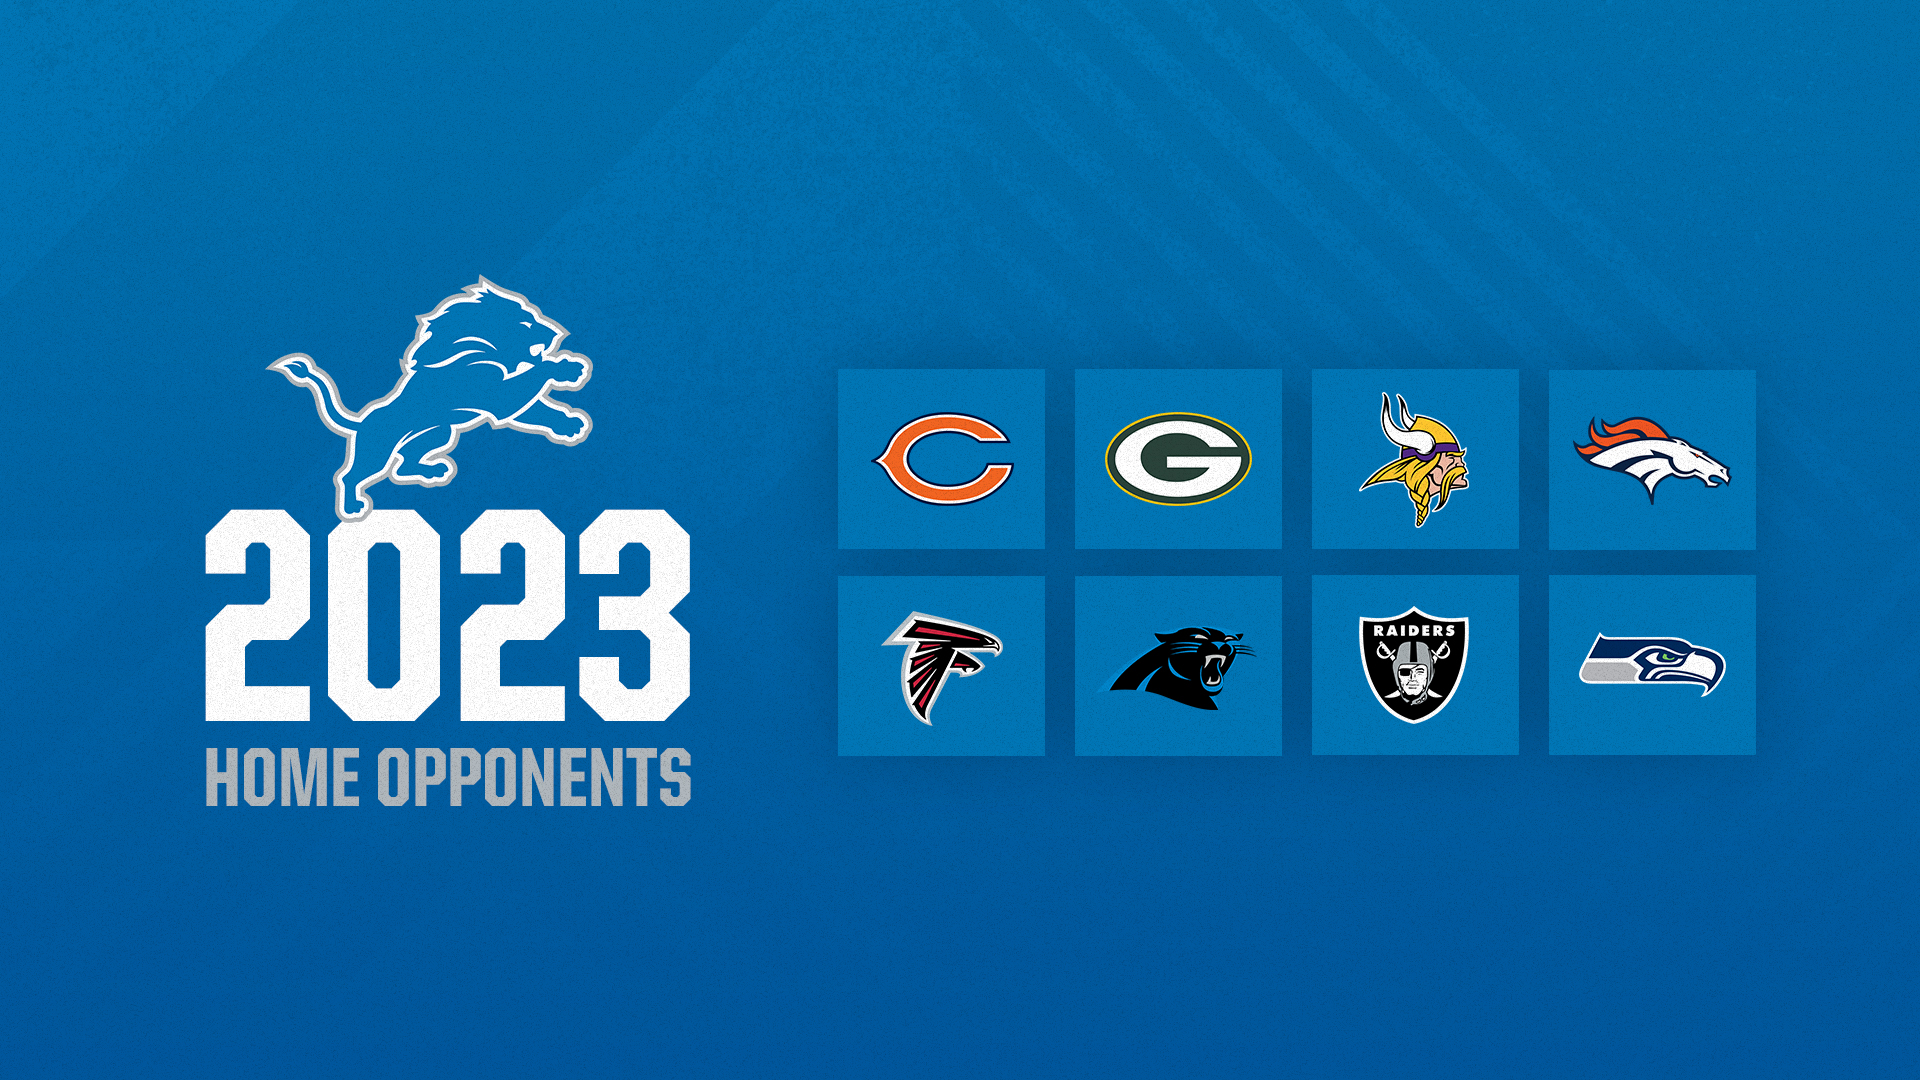 Lions-2023-HomeOpponents-16x9.jpg